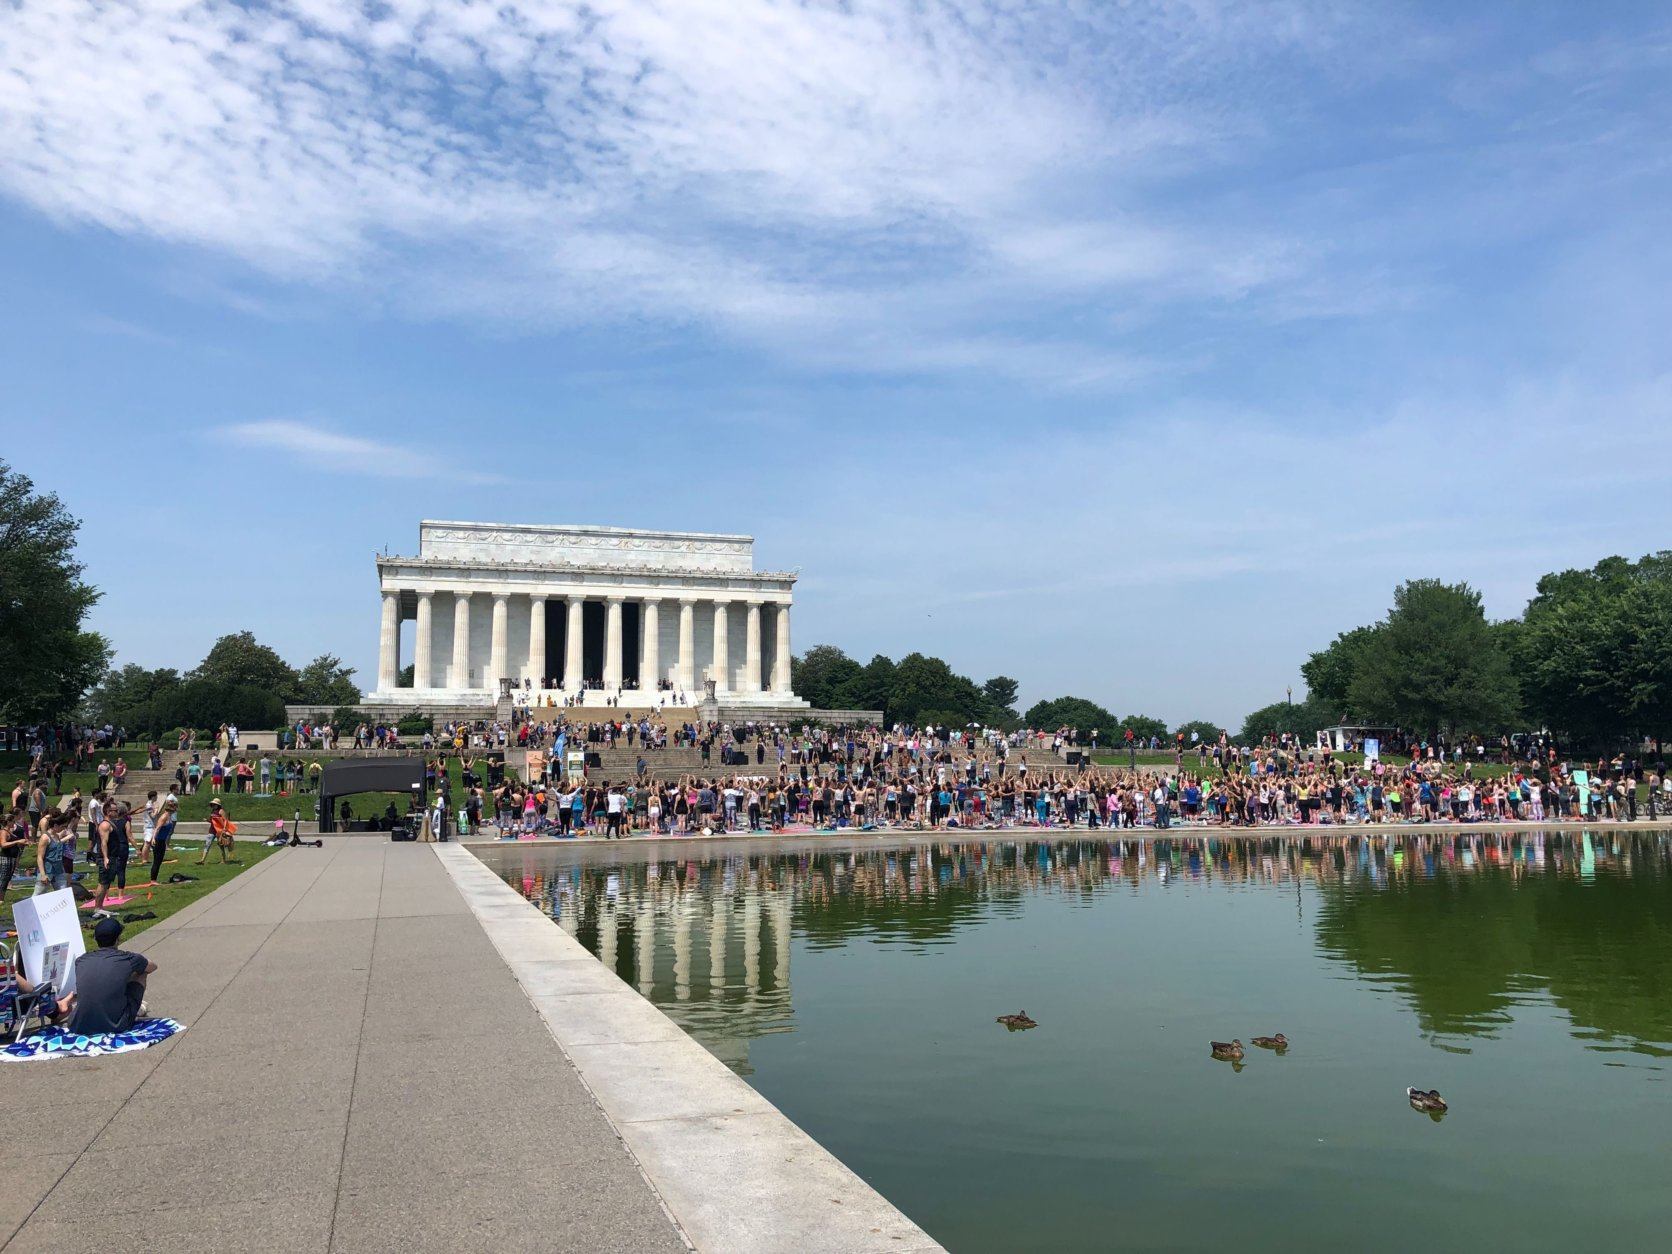 Thousands gathered in D.C. to practice yoga on the National Mall Sunday, May 19, 2019. (WTOP/Keara Dowd)